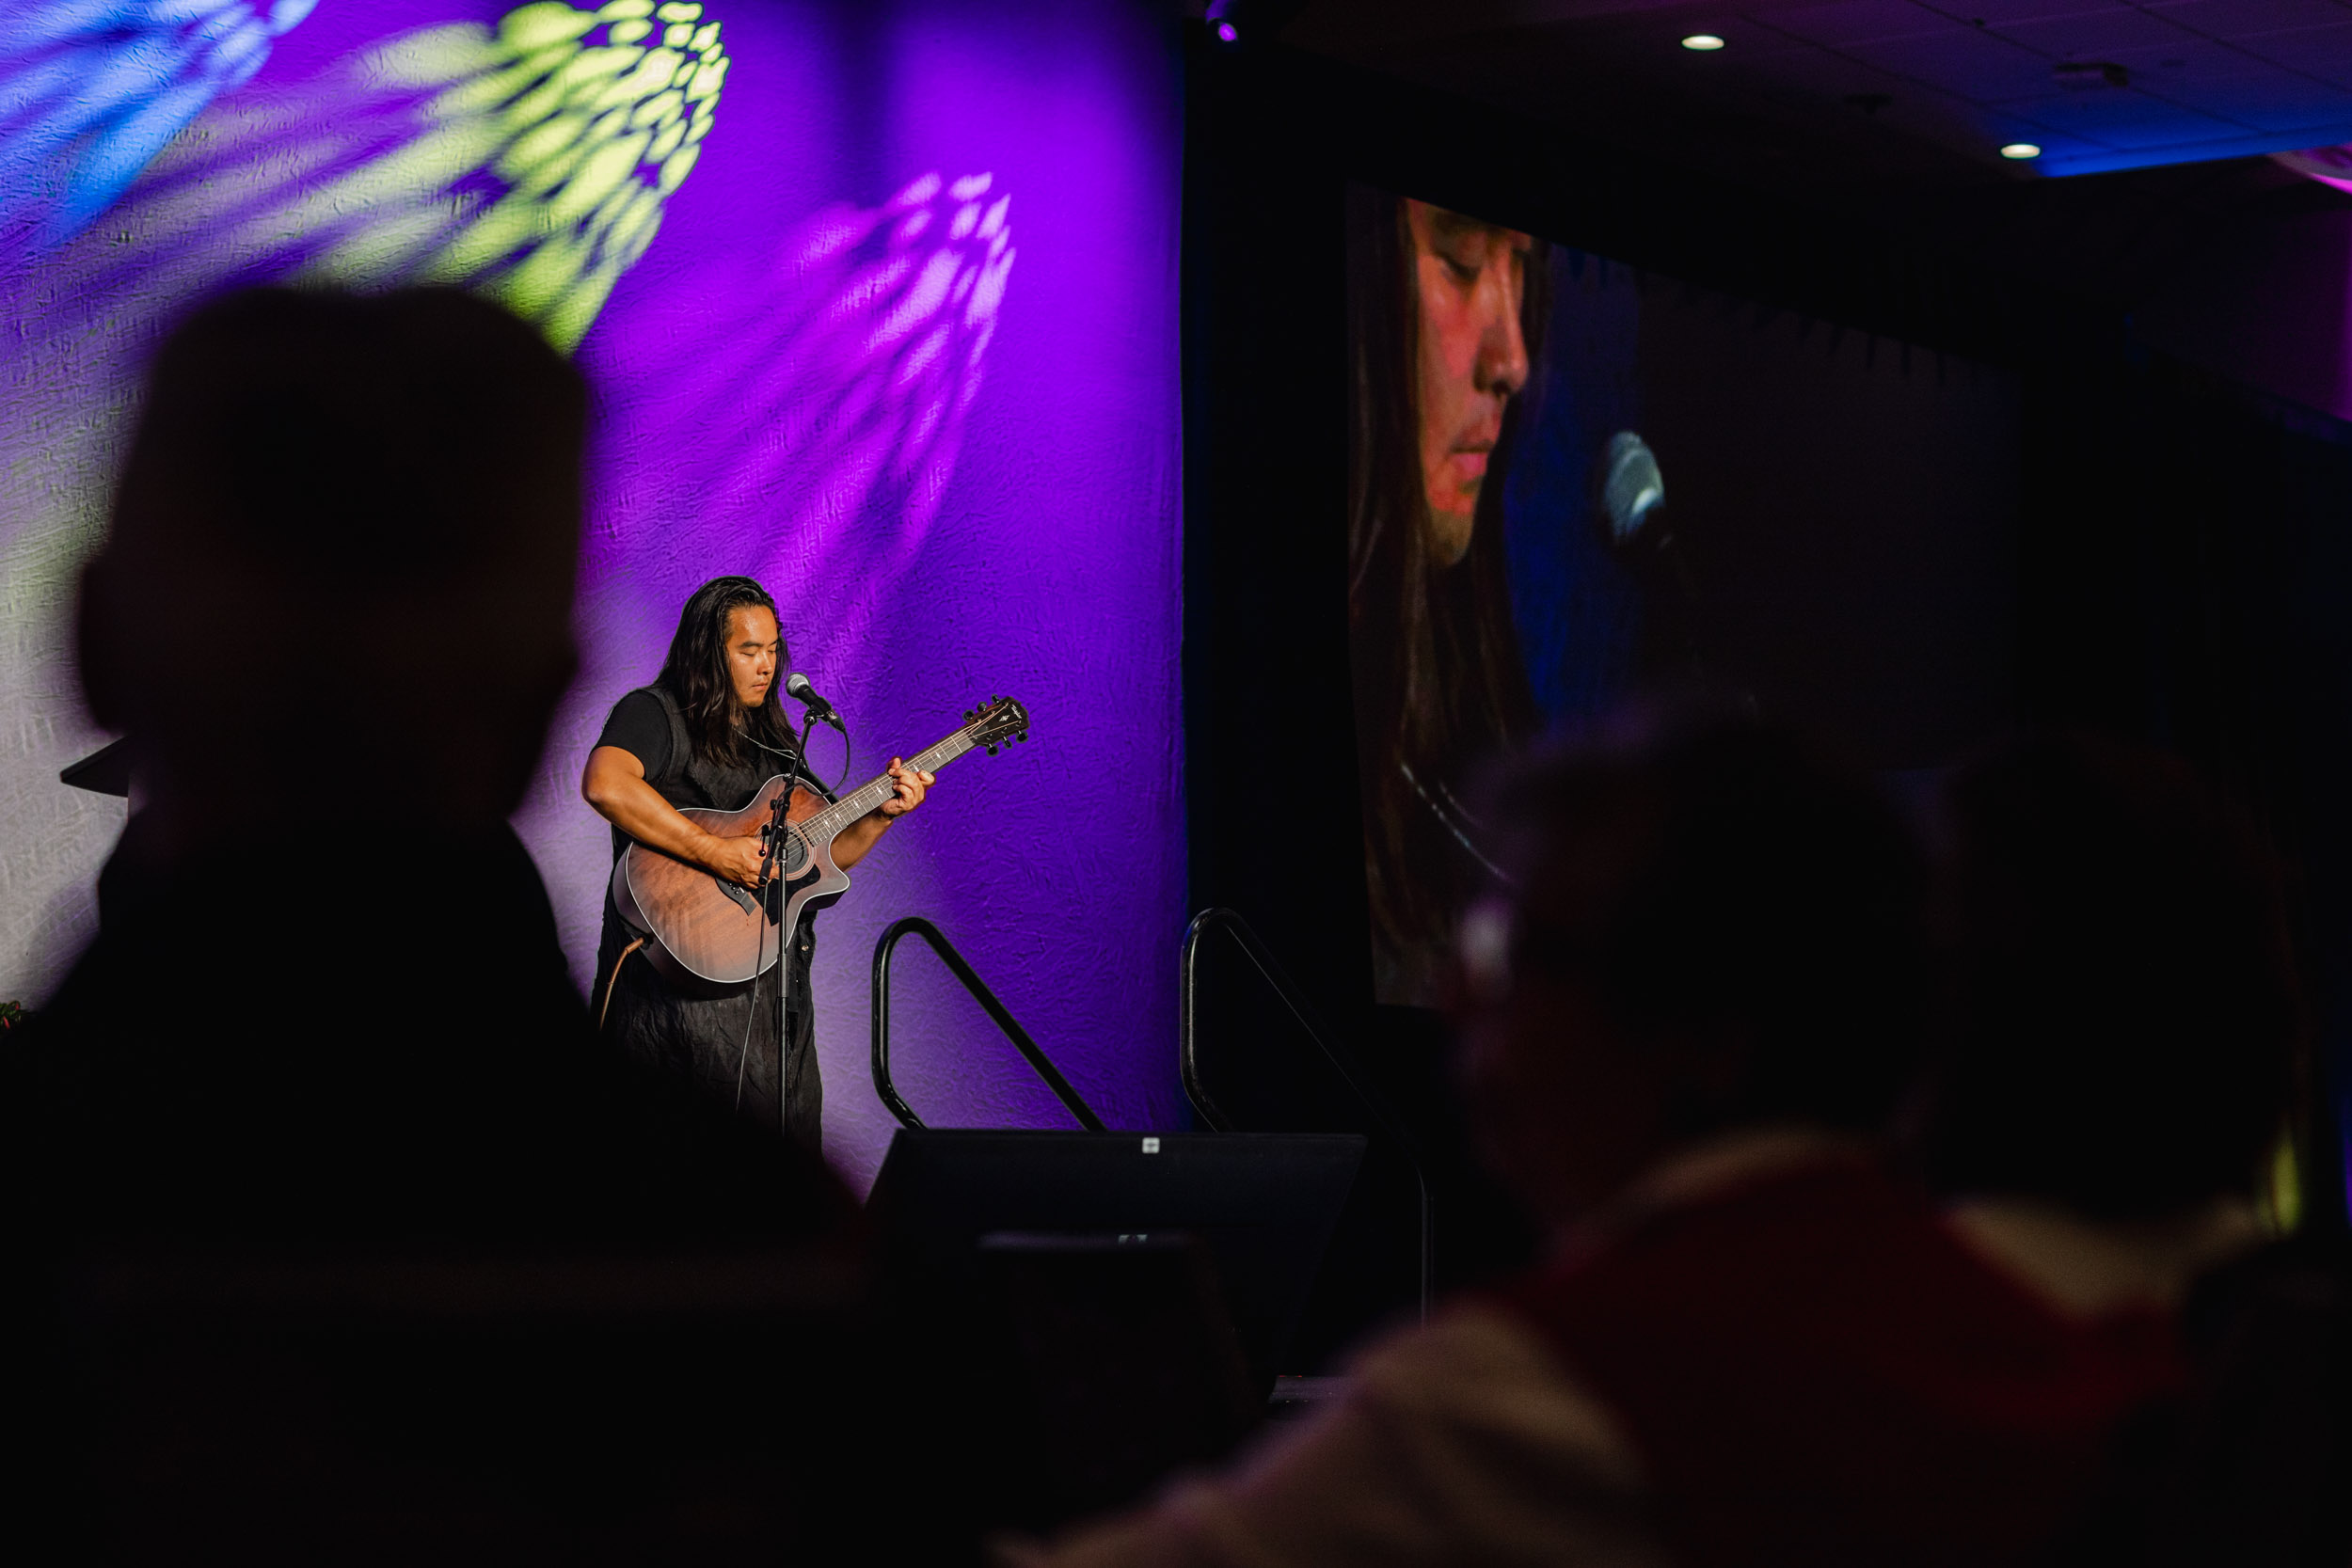 A woman performing with an acoustic guitar at a conference.